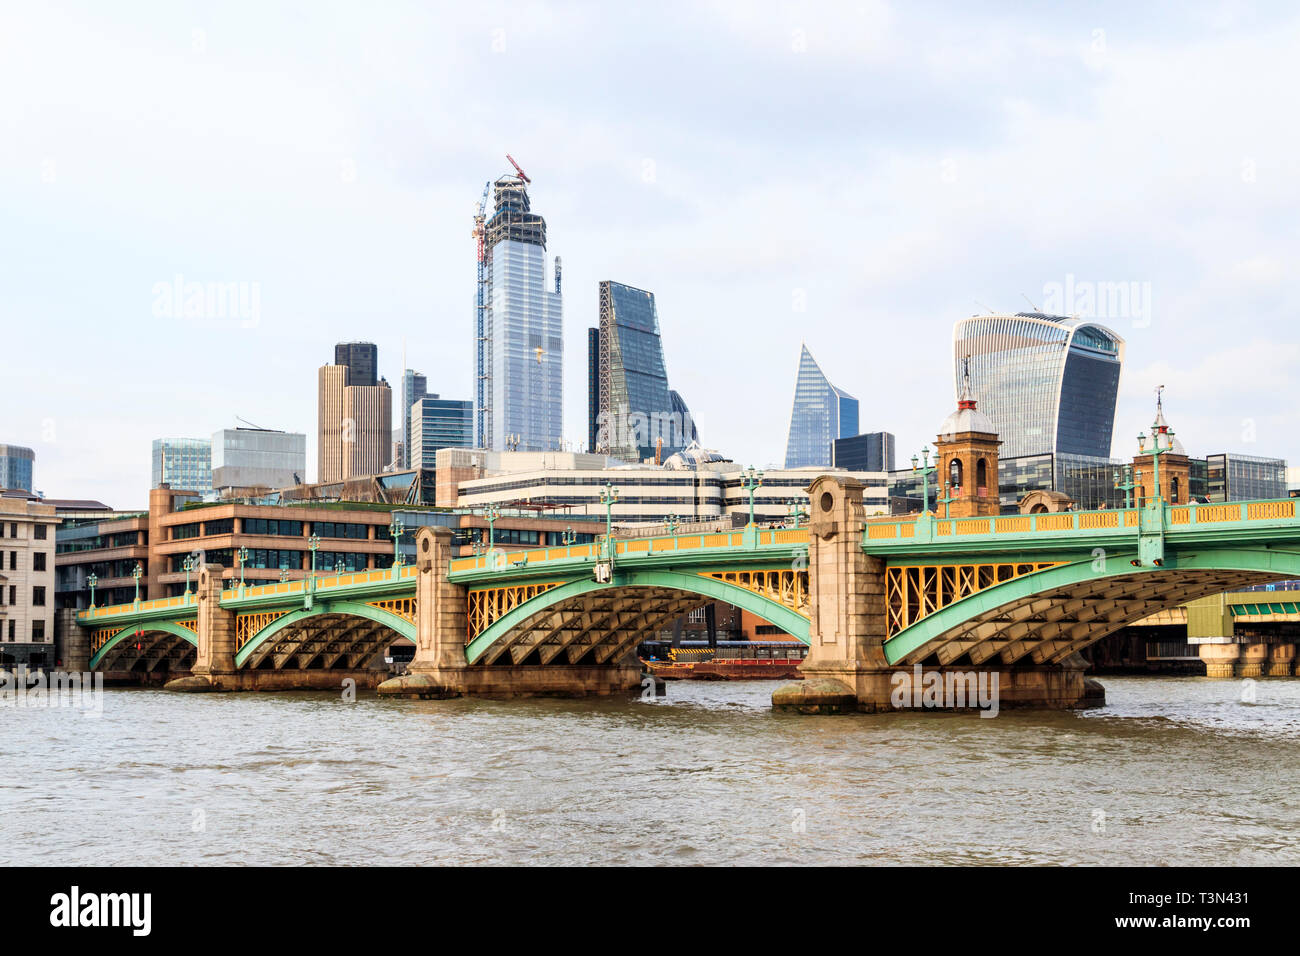 Southwark Bridge and the changing skyline of the City of London, across the River Thames from Bankside, London, UK, April 2019. Stock Photo